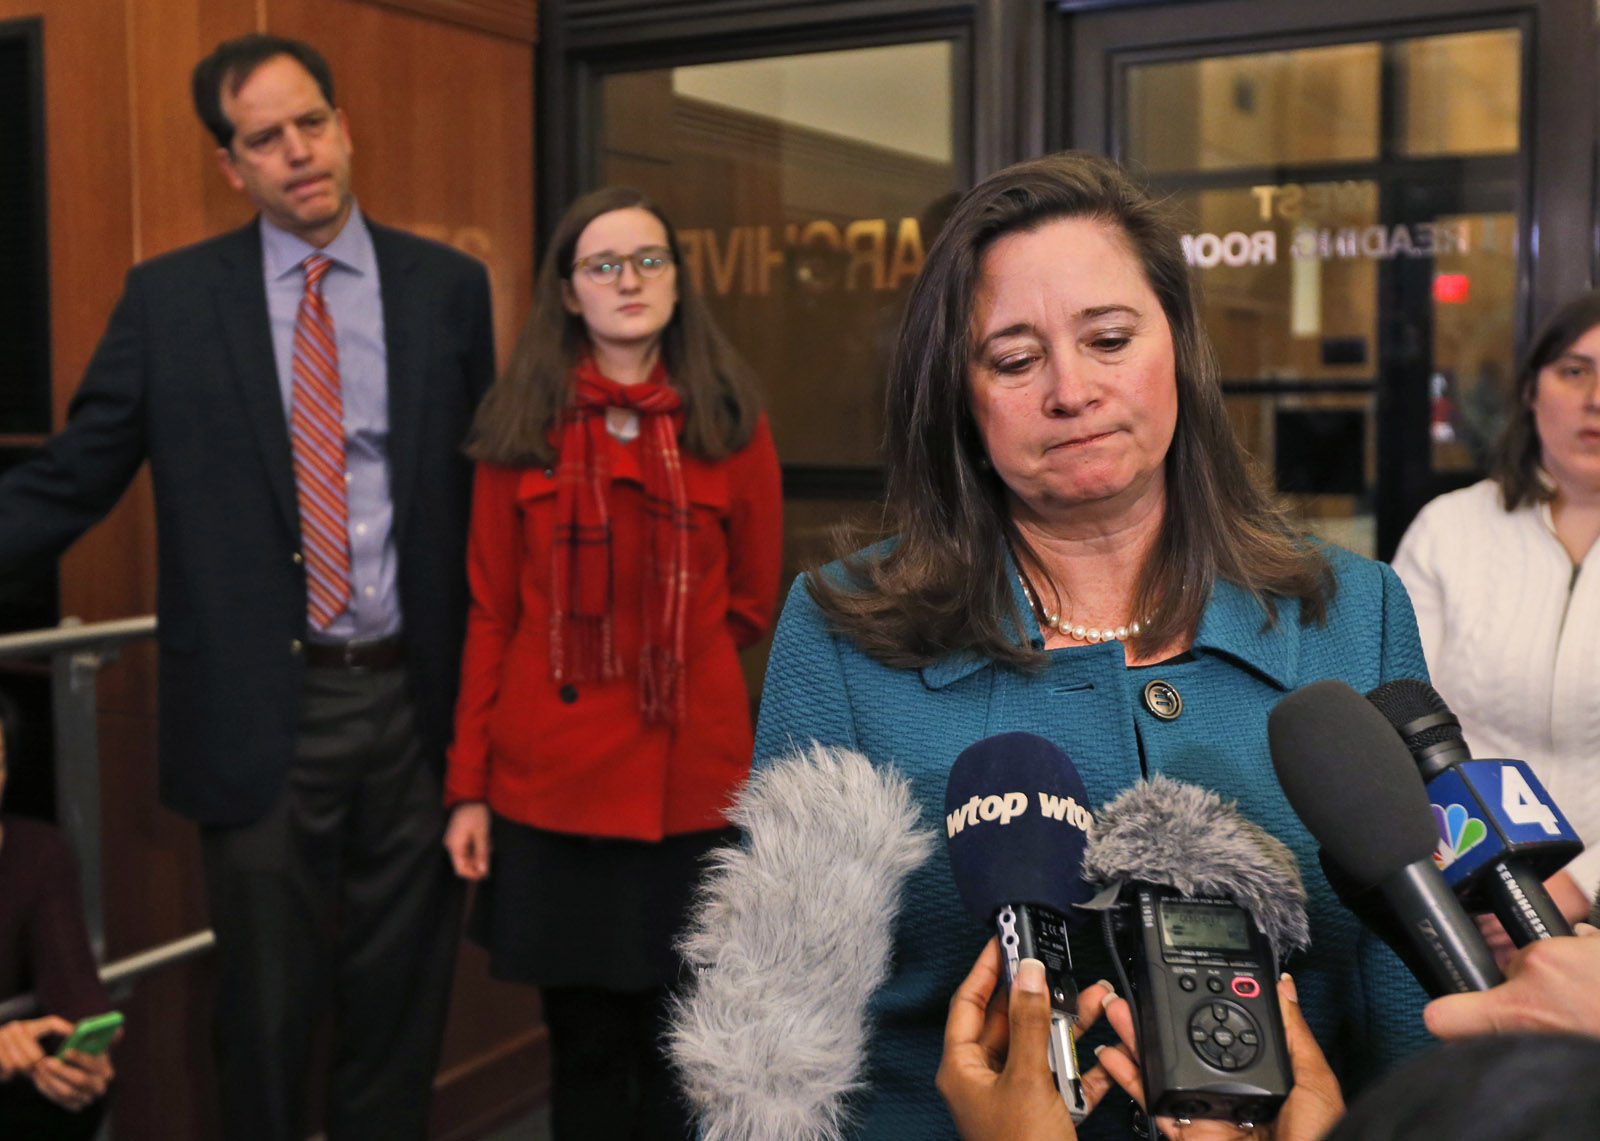 Democratic candidate for the 94th House of Delegates seat, Shelly Simonds, right, speaks to the media as her husband, Paul Danehy, left, and daughter, Georgia Danehy, center, look on after a drawing to determine the winner of a tied election at the Capitol in Richmond, Va., Thursday, Jan. 4, 2018. Republican Delegate David Yancey won the drawing. (AP Photo/Steve Helber)